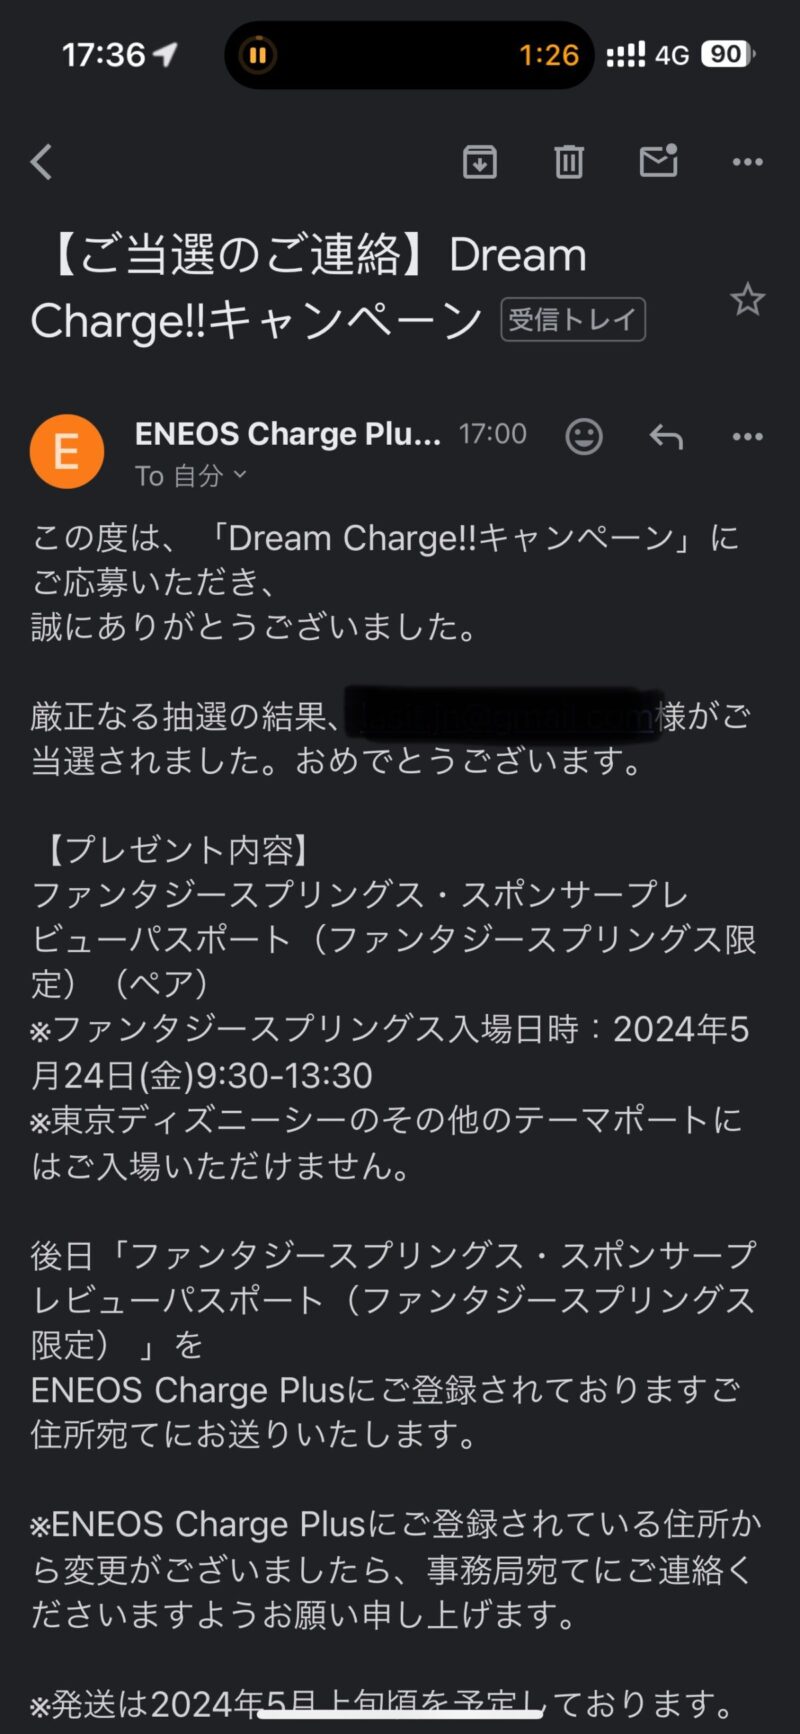 ENEOS Charge Plus Dream Charge!!当選メール